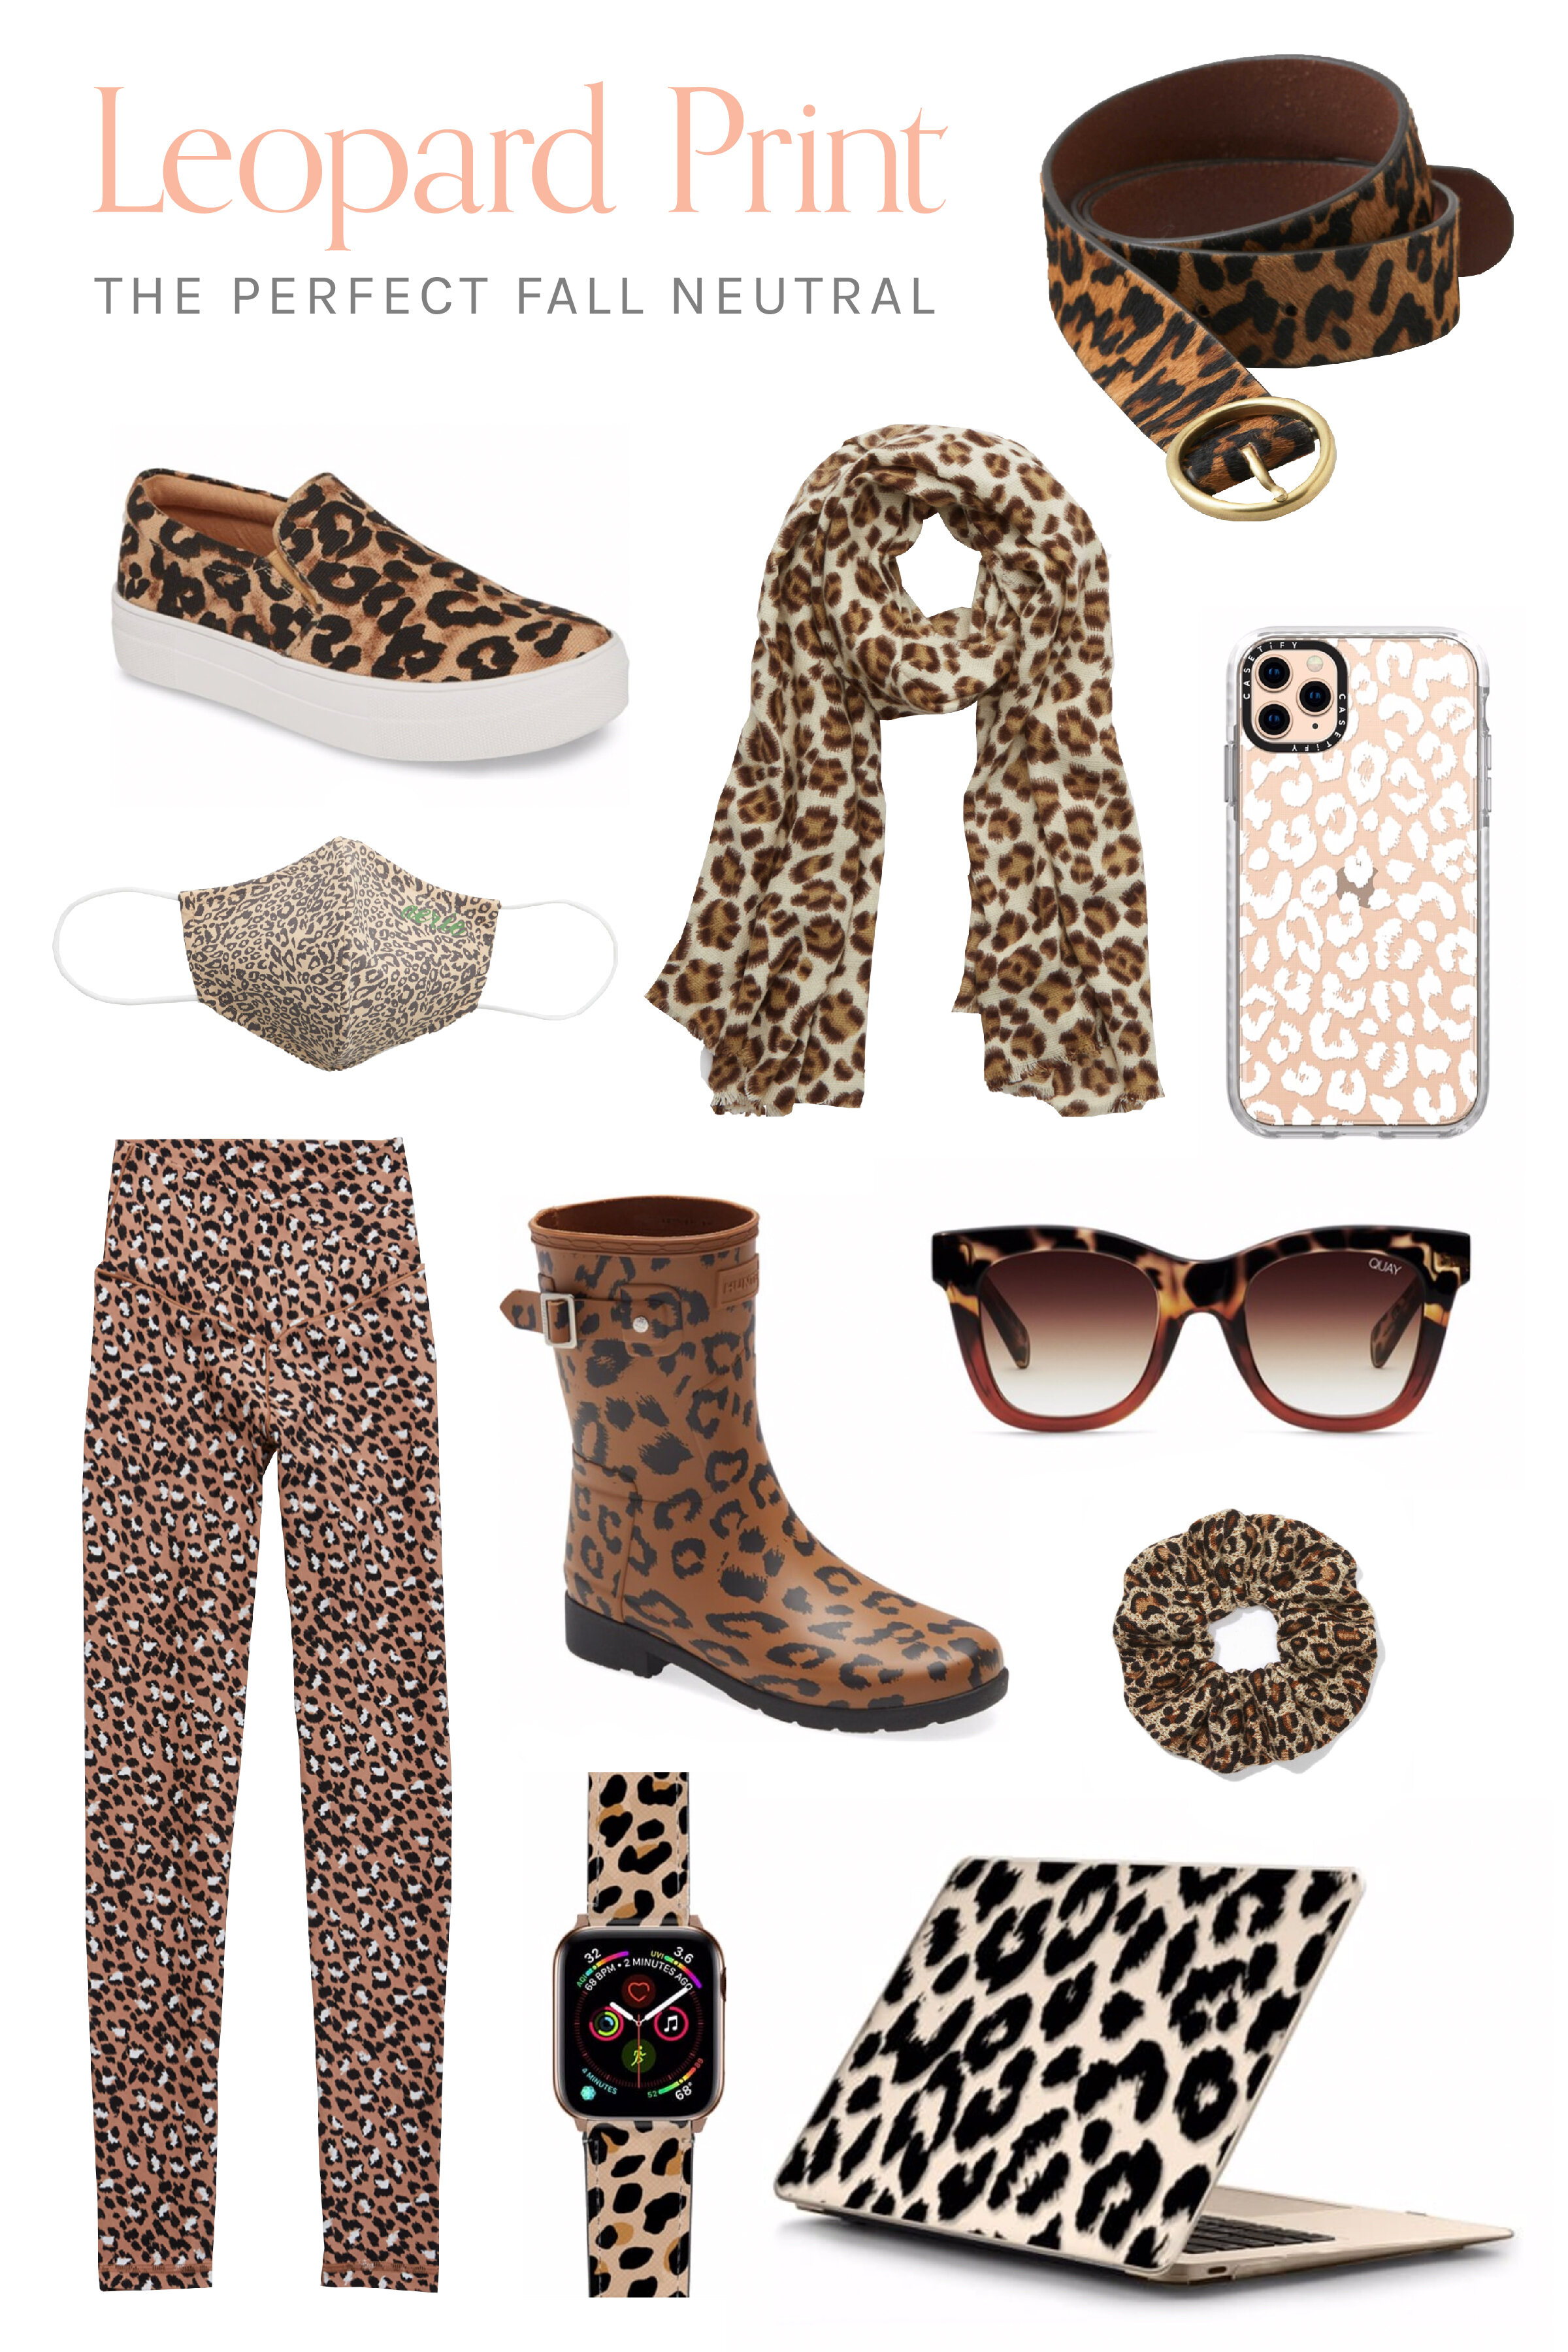 Leopard Print: The Perfect Fall Neutral — Emily Lavinskas | Lifestyle Brand